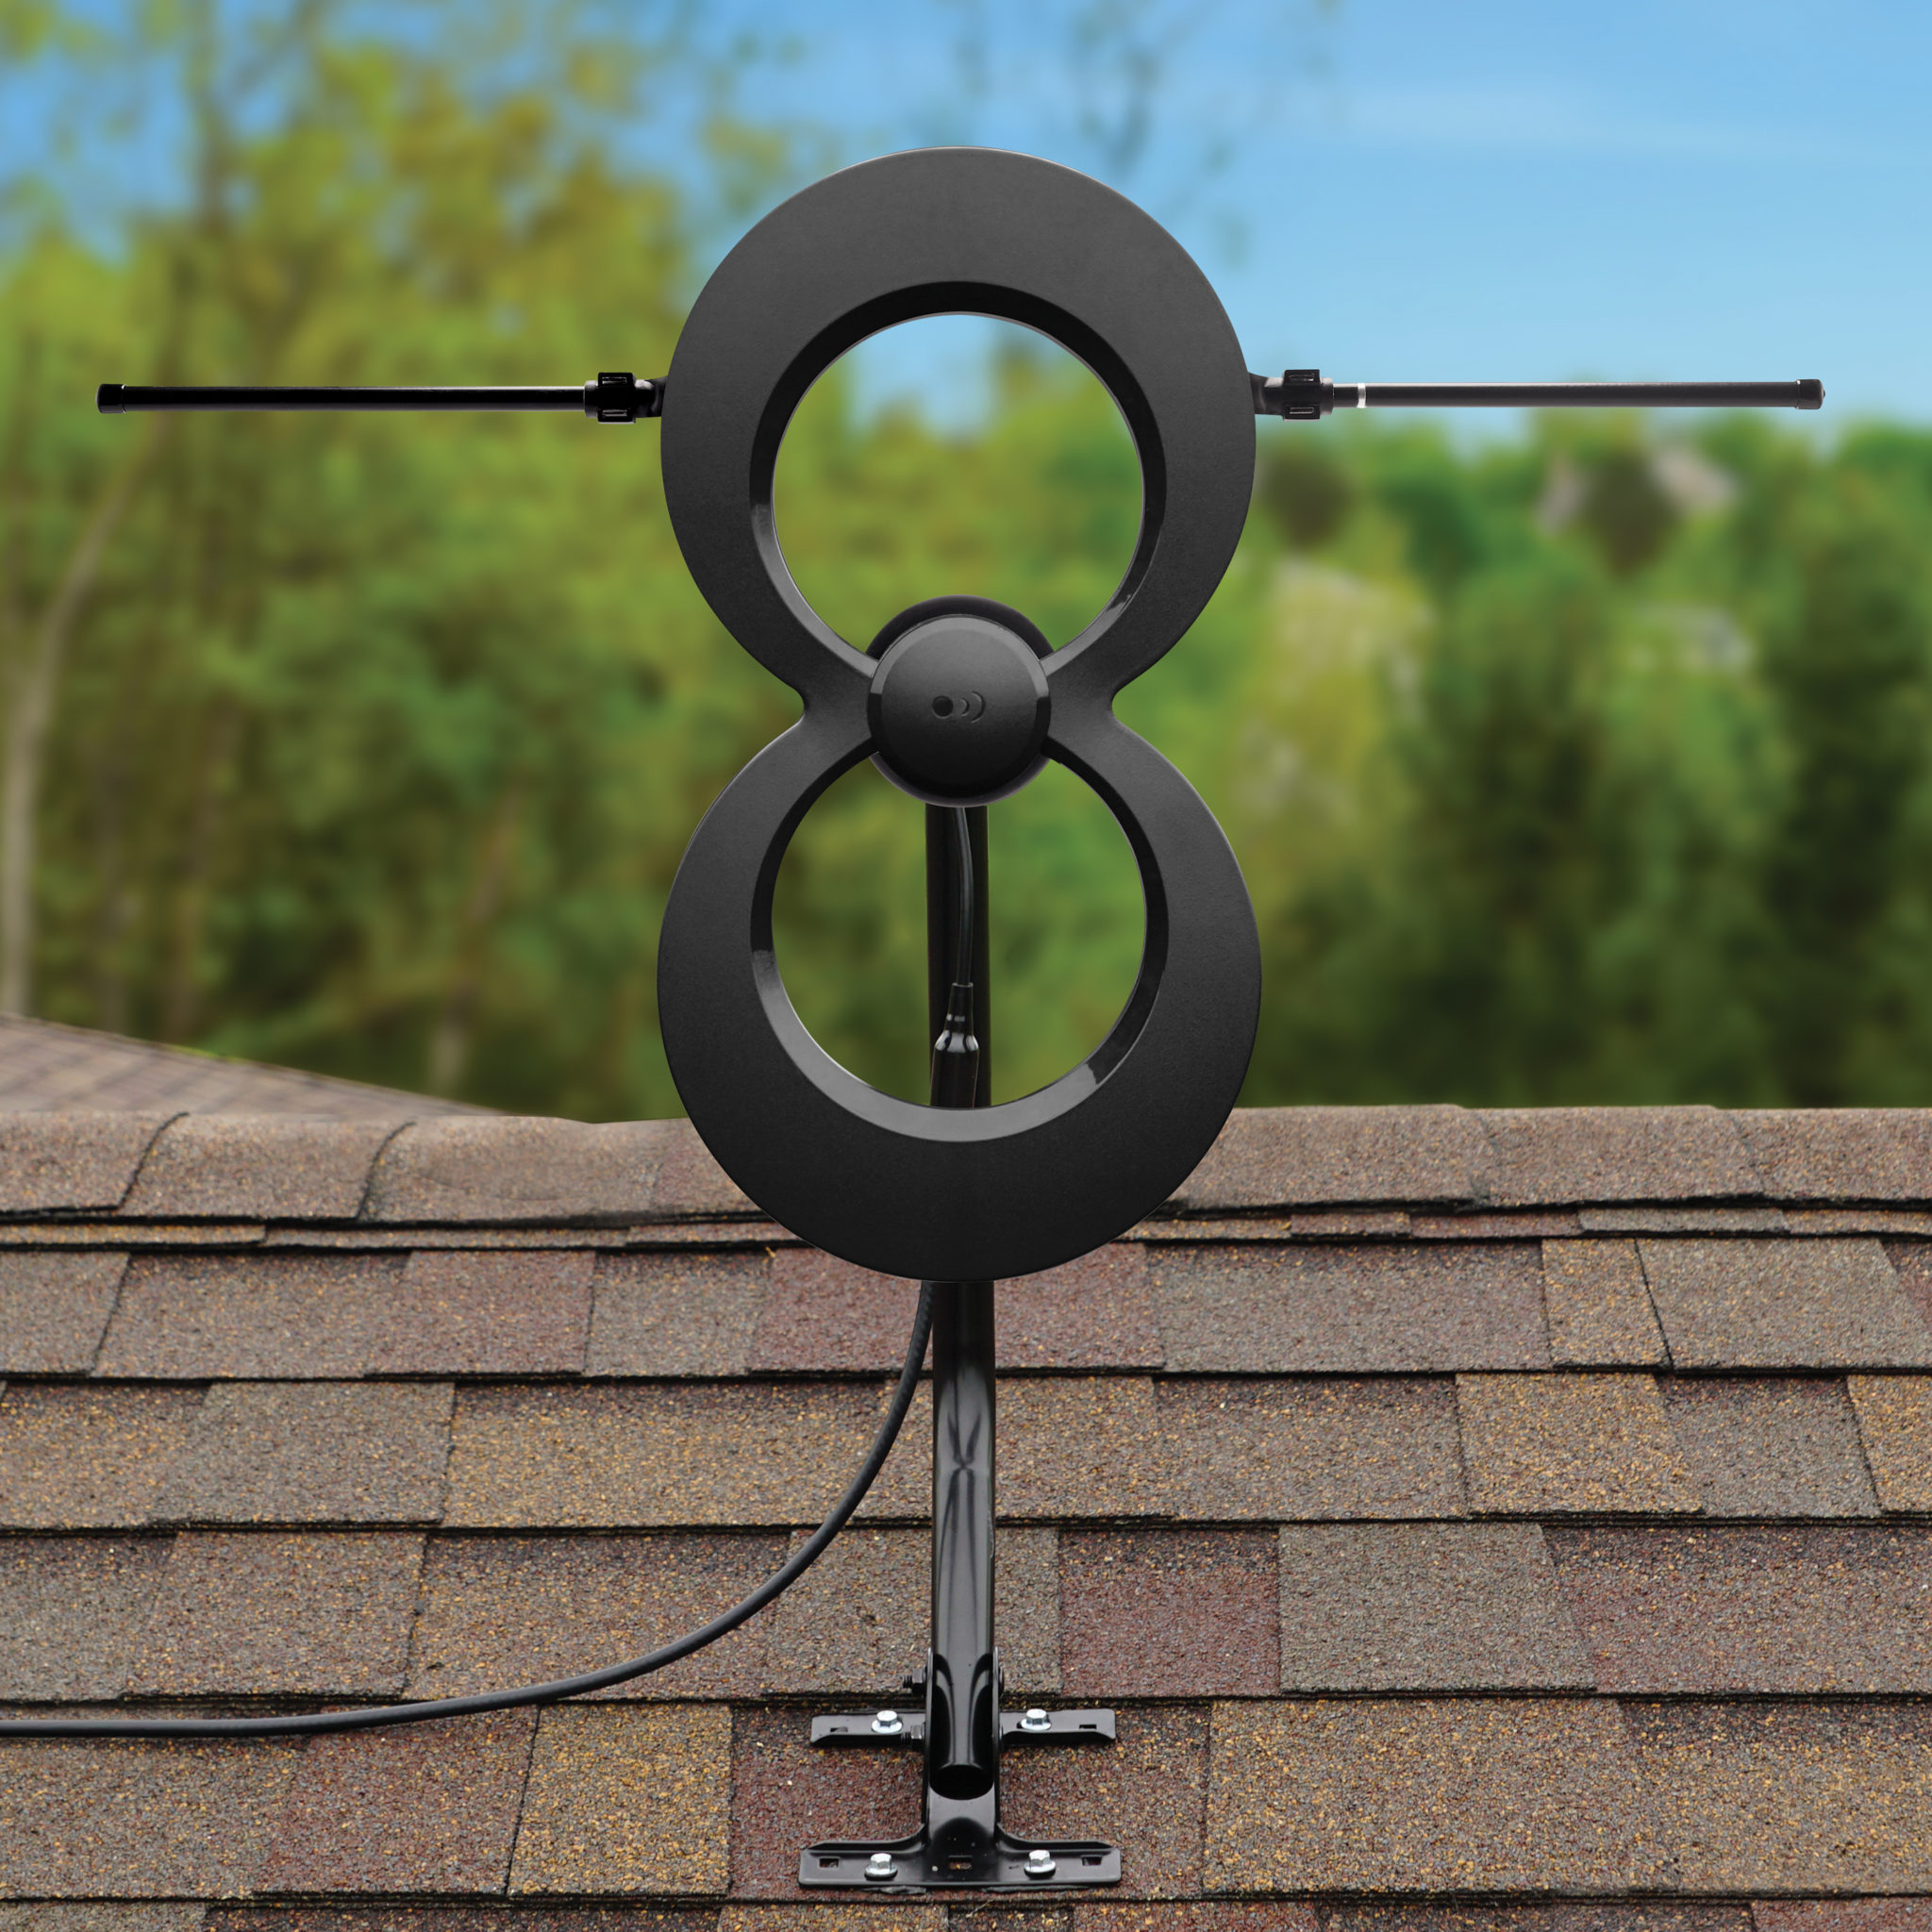 Black Friday Deal: Get 35% Off Antennas and Accessories from Antennas Direct